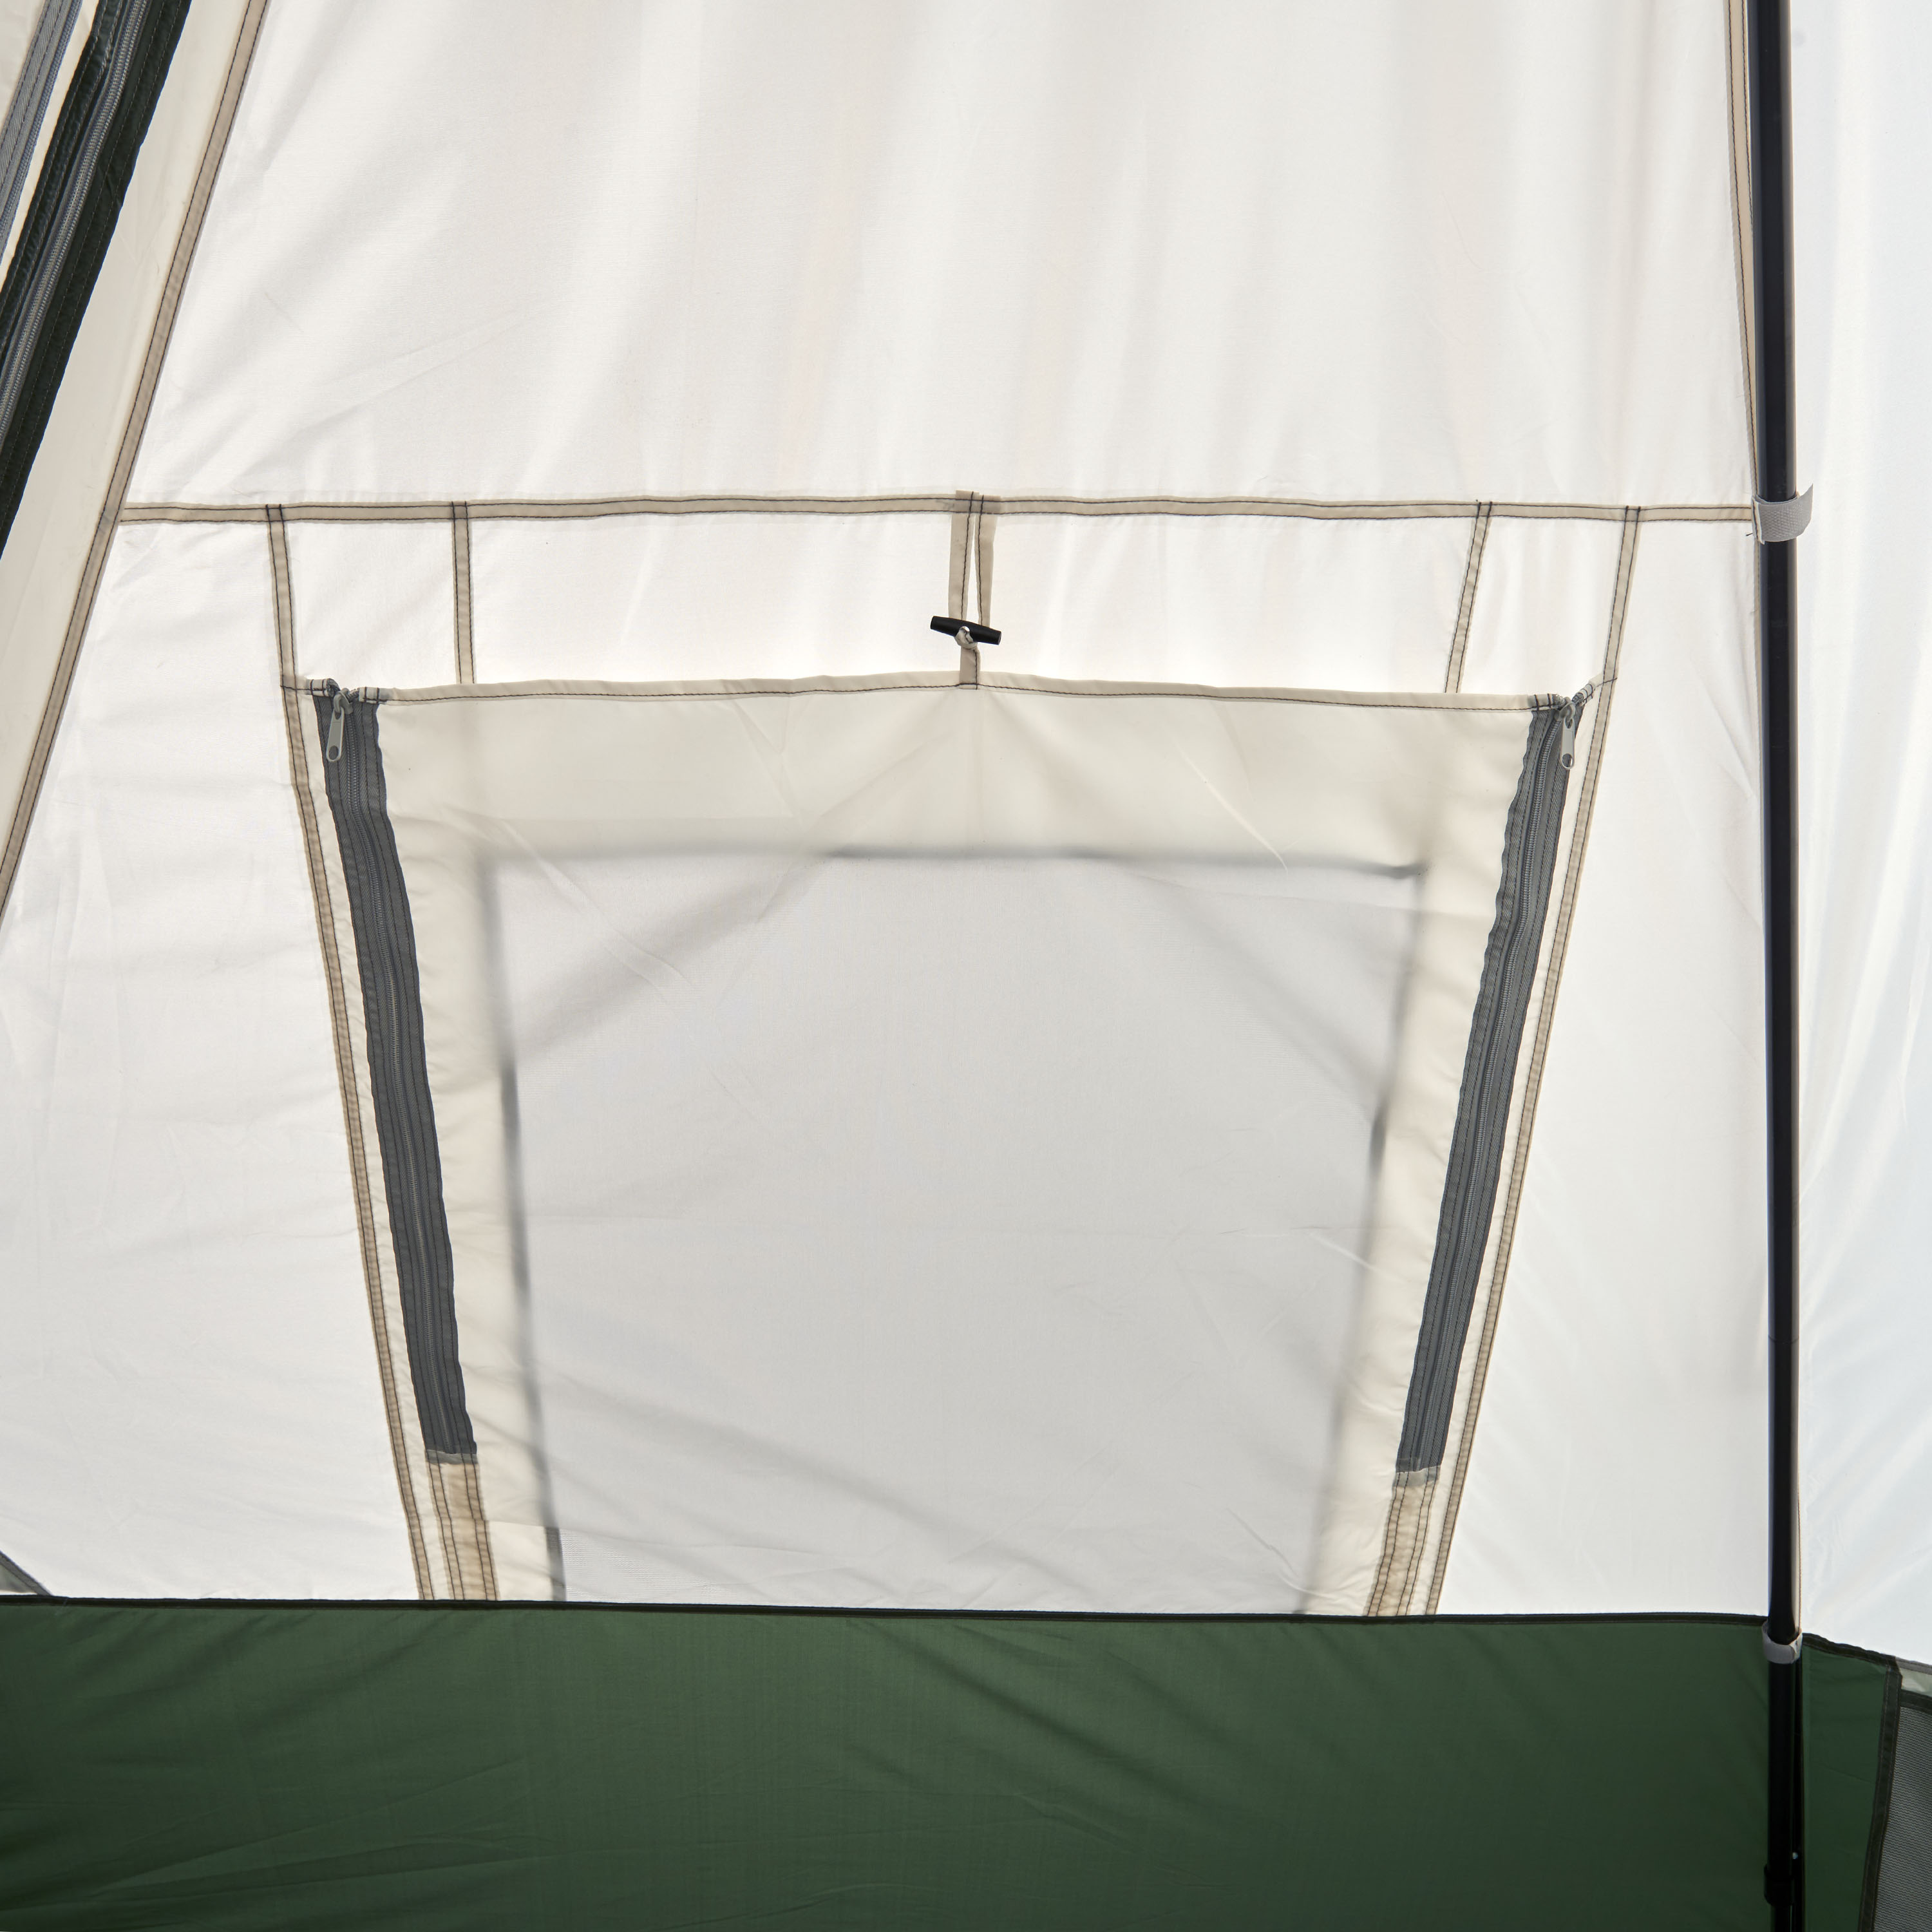 Ozark Trail 7-Person 1-Room Teepee Tent, with Vented Rear Window, Green - image 5 of 12